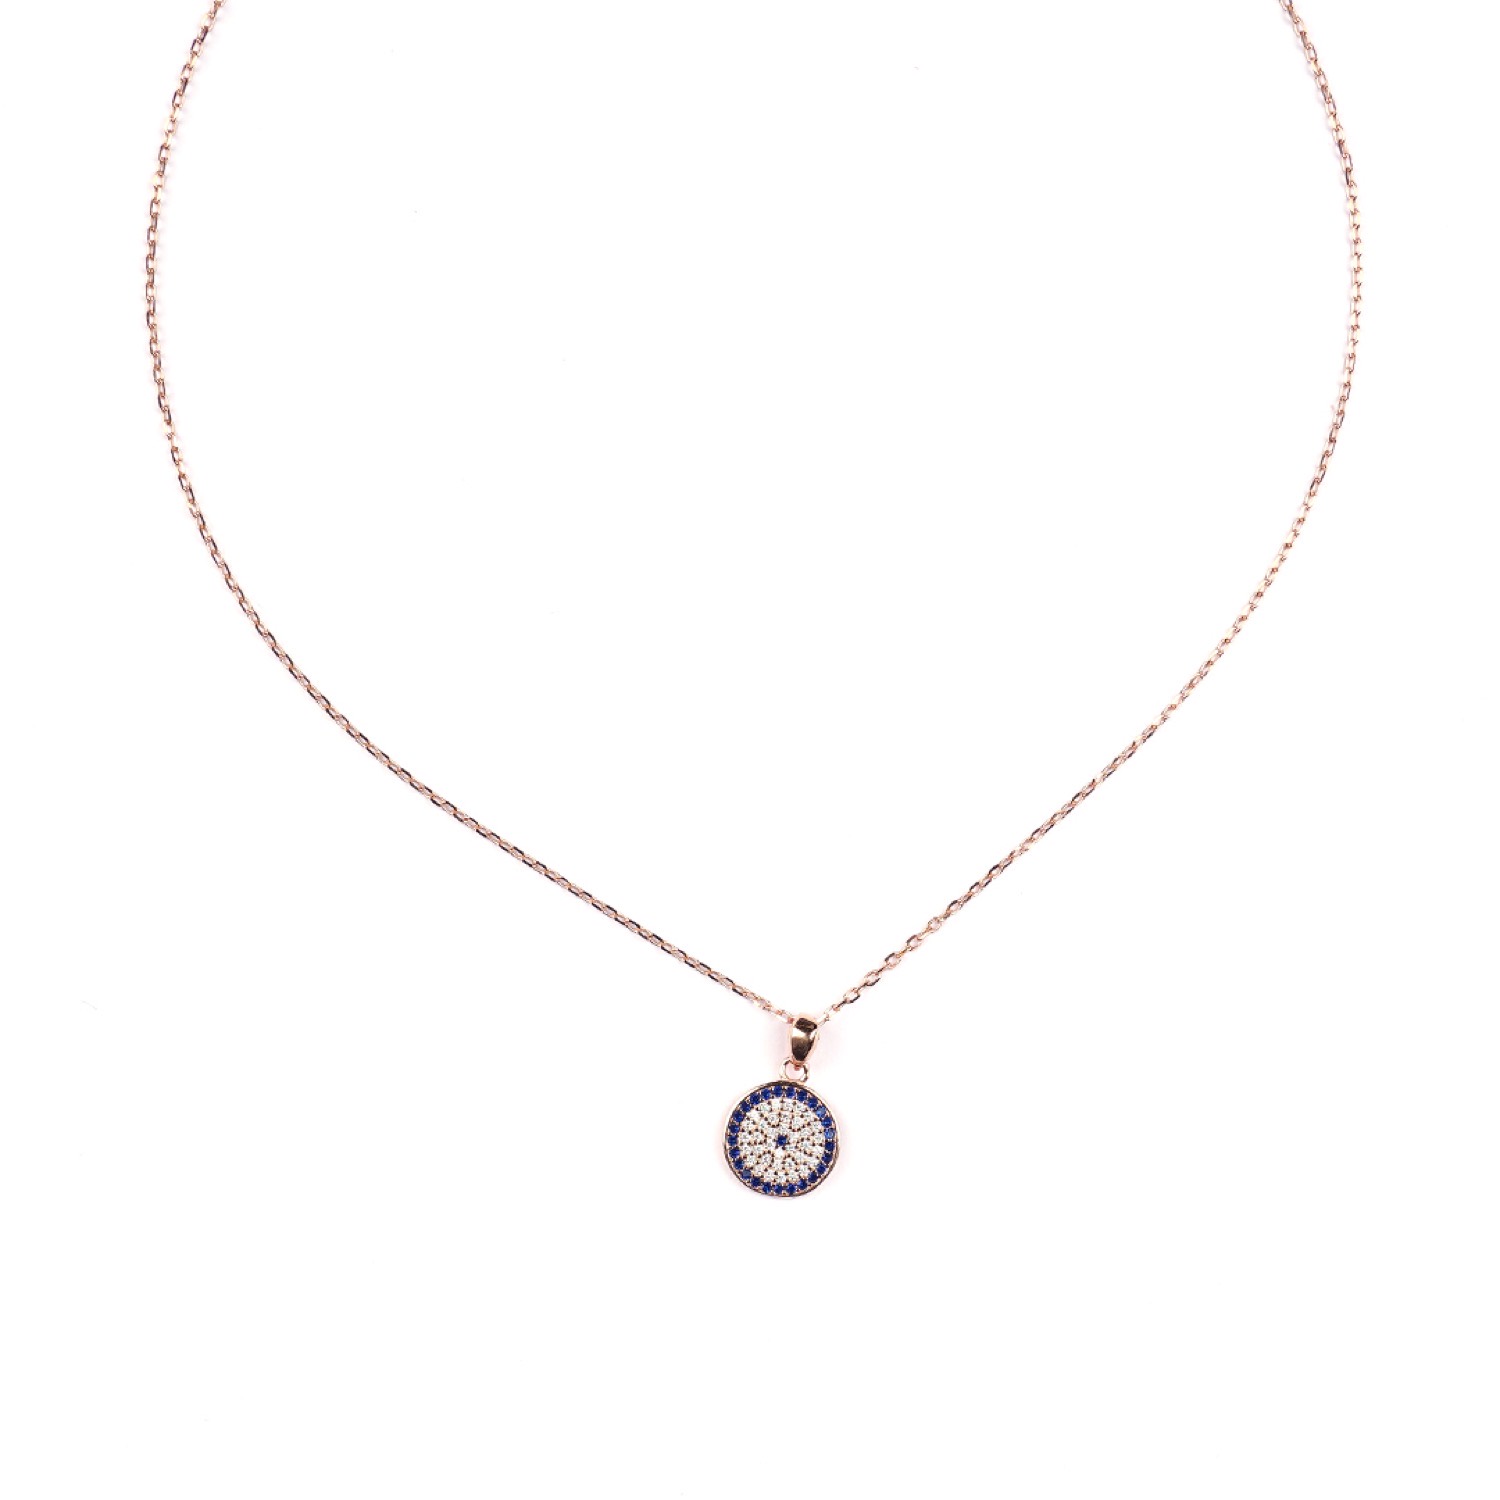 varam_chains_072022_white_and_ink_blue_stone_design_pendant_rose_gold_chain_with_earrings_1-1